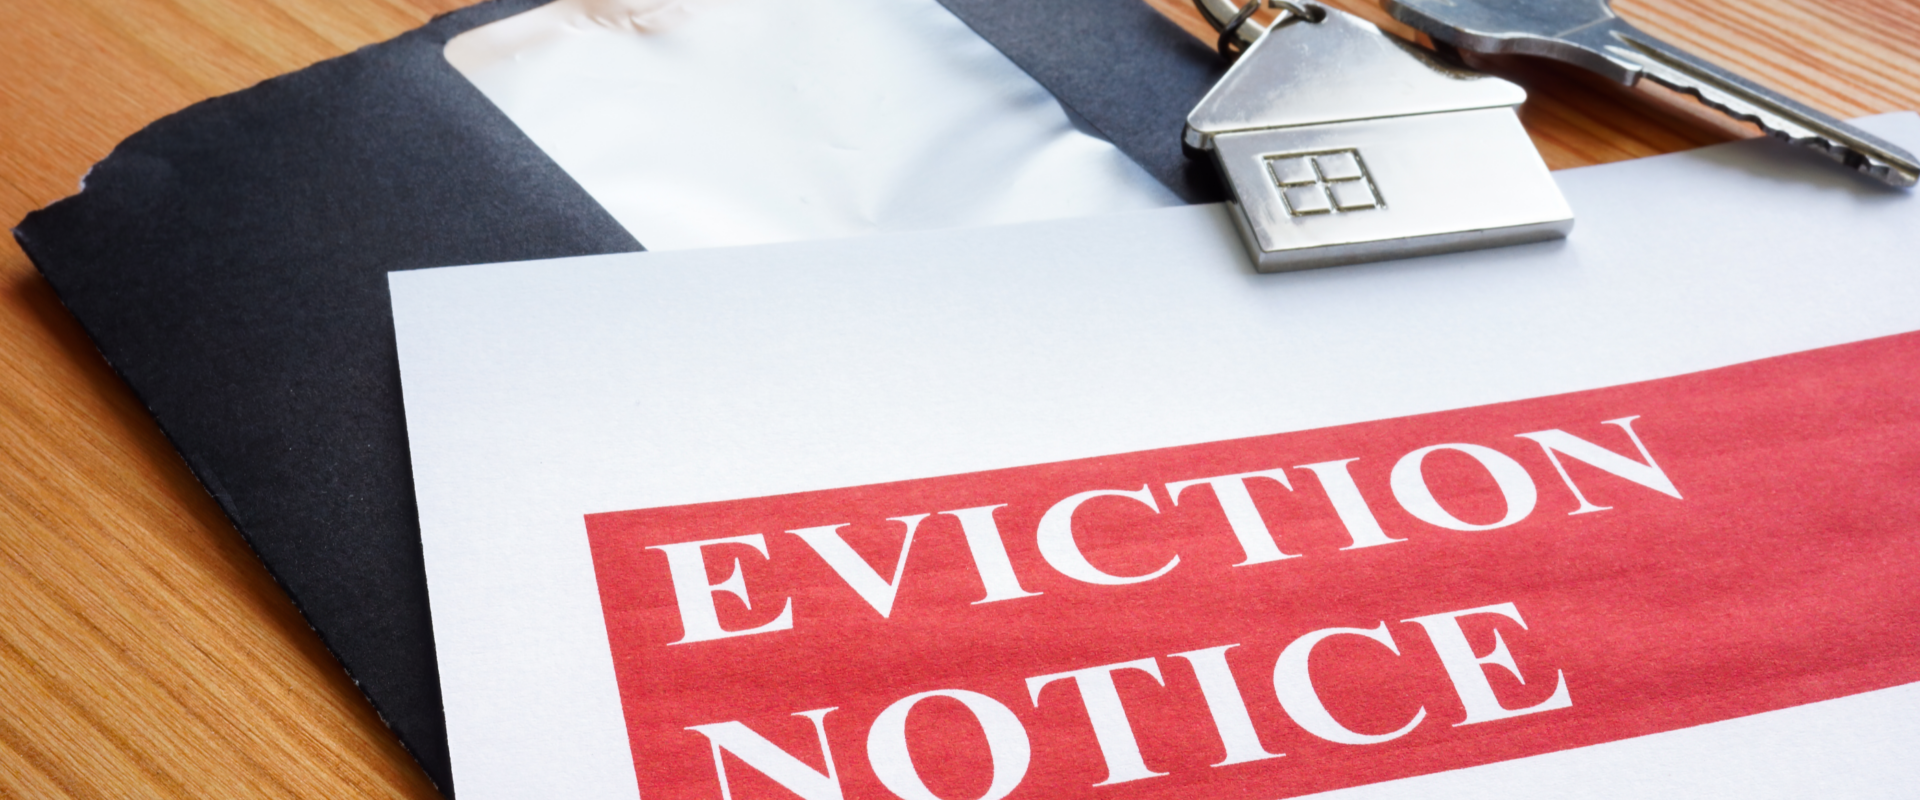 How to evict an unruly tenant in Dayton Ohio